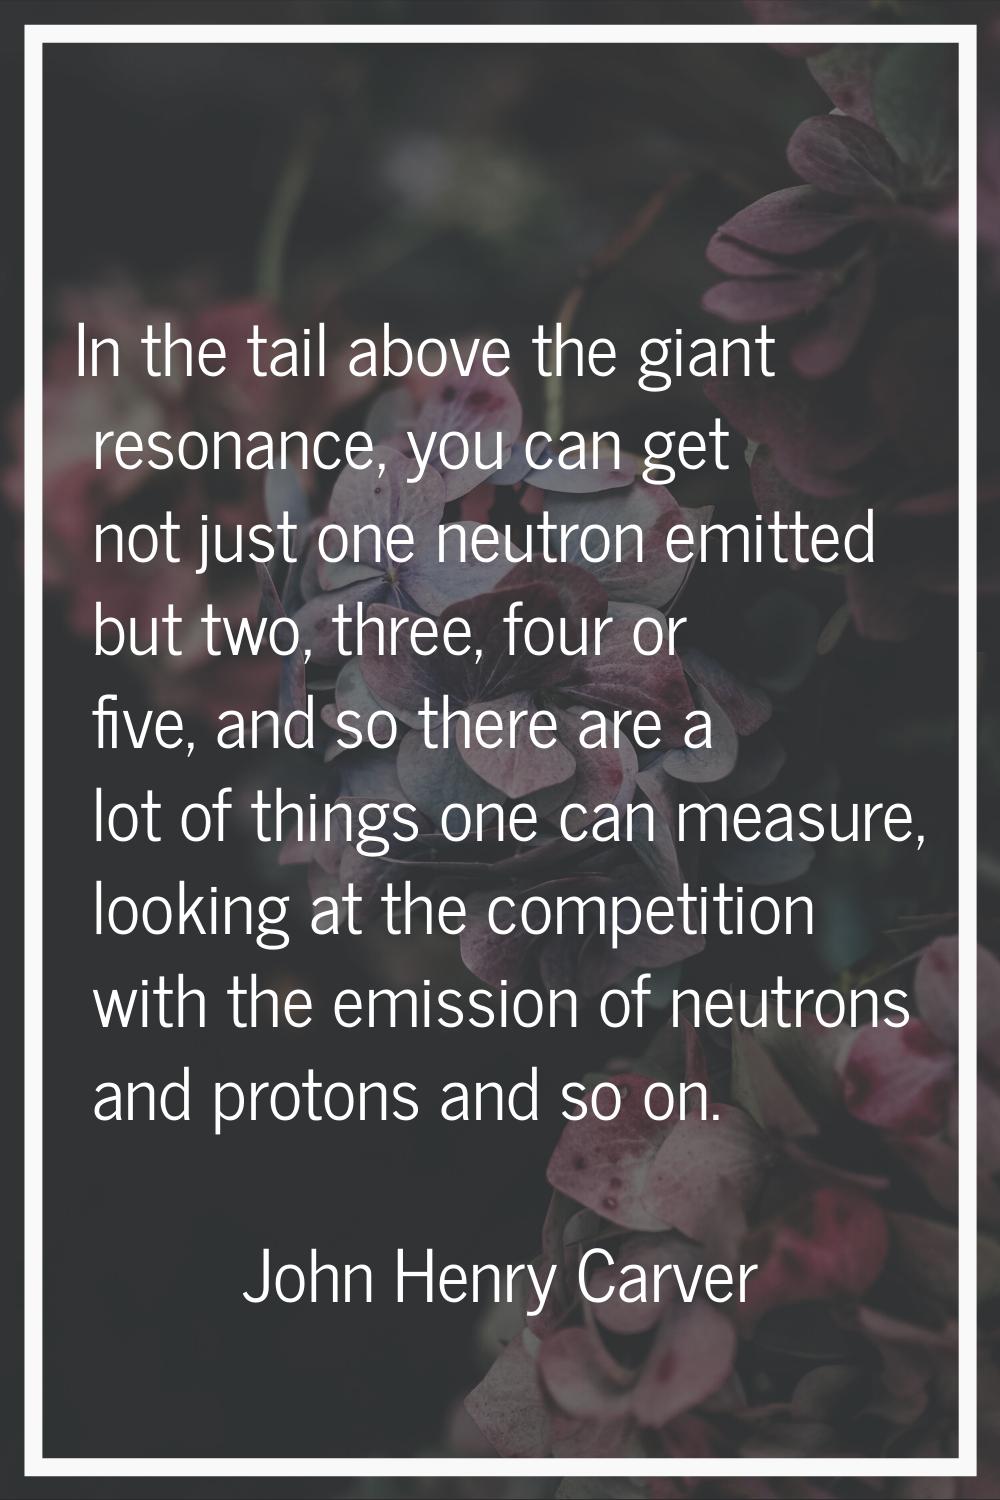 In the tail above the giant resonance, you can get not just one neutron emitted but two, three, fou